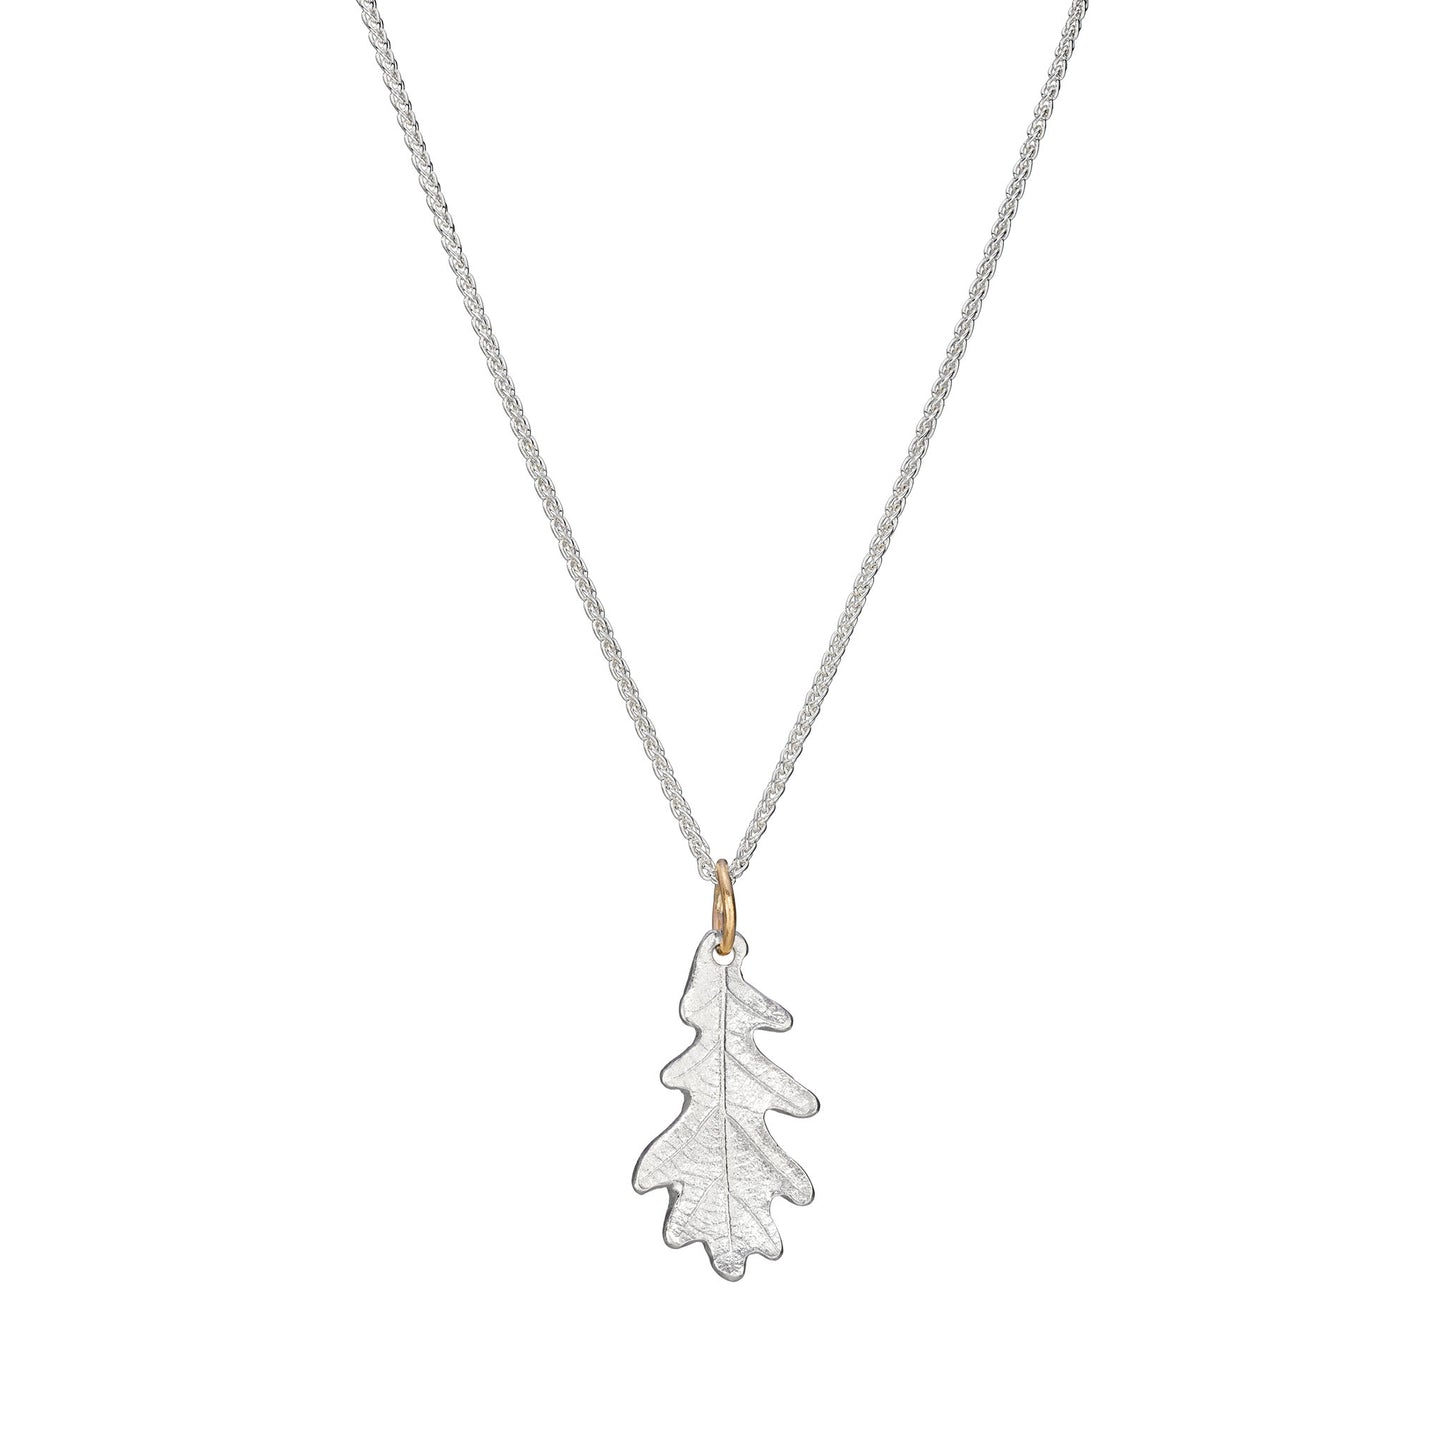 Short Oak Tree Necklace - Lucy Jade Sylvester - Jewellery Textured by Nature